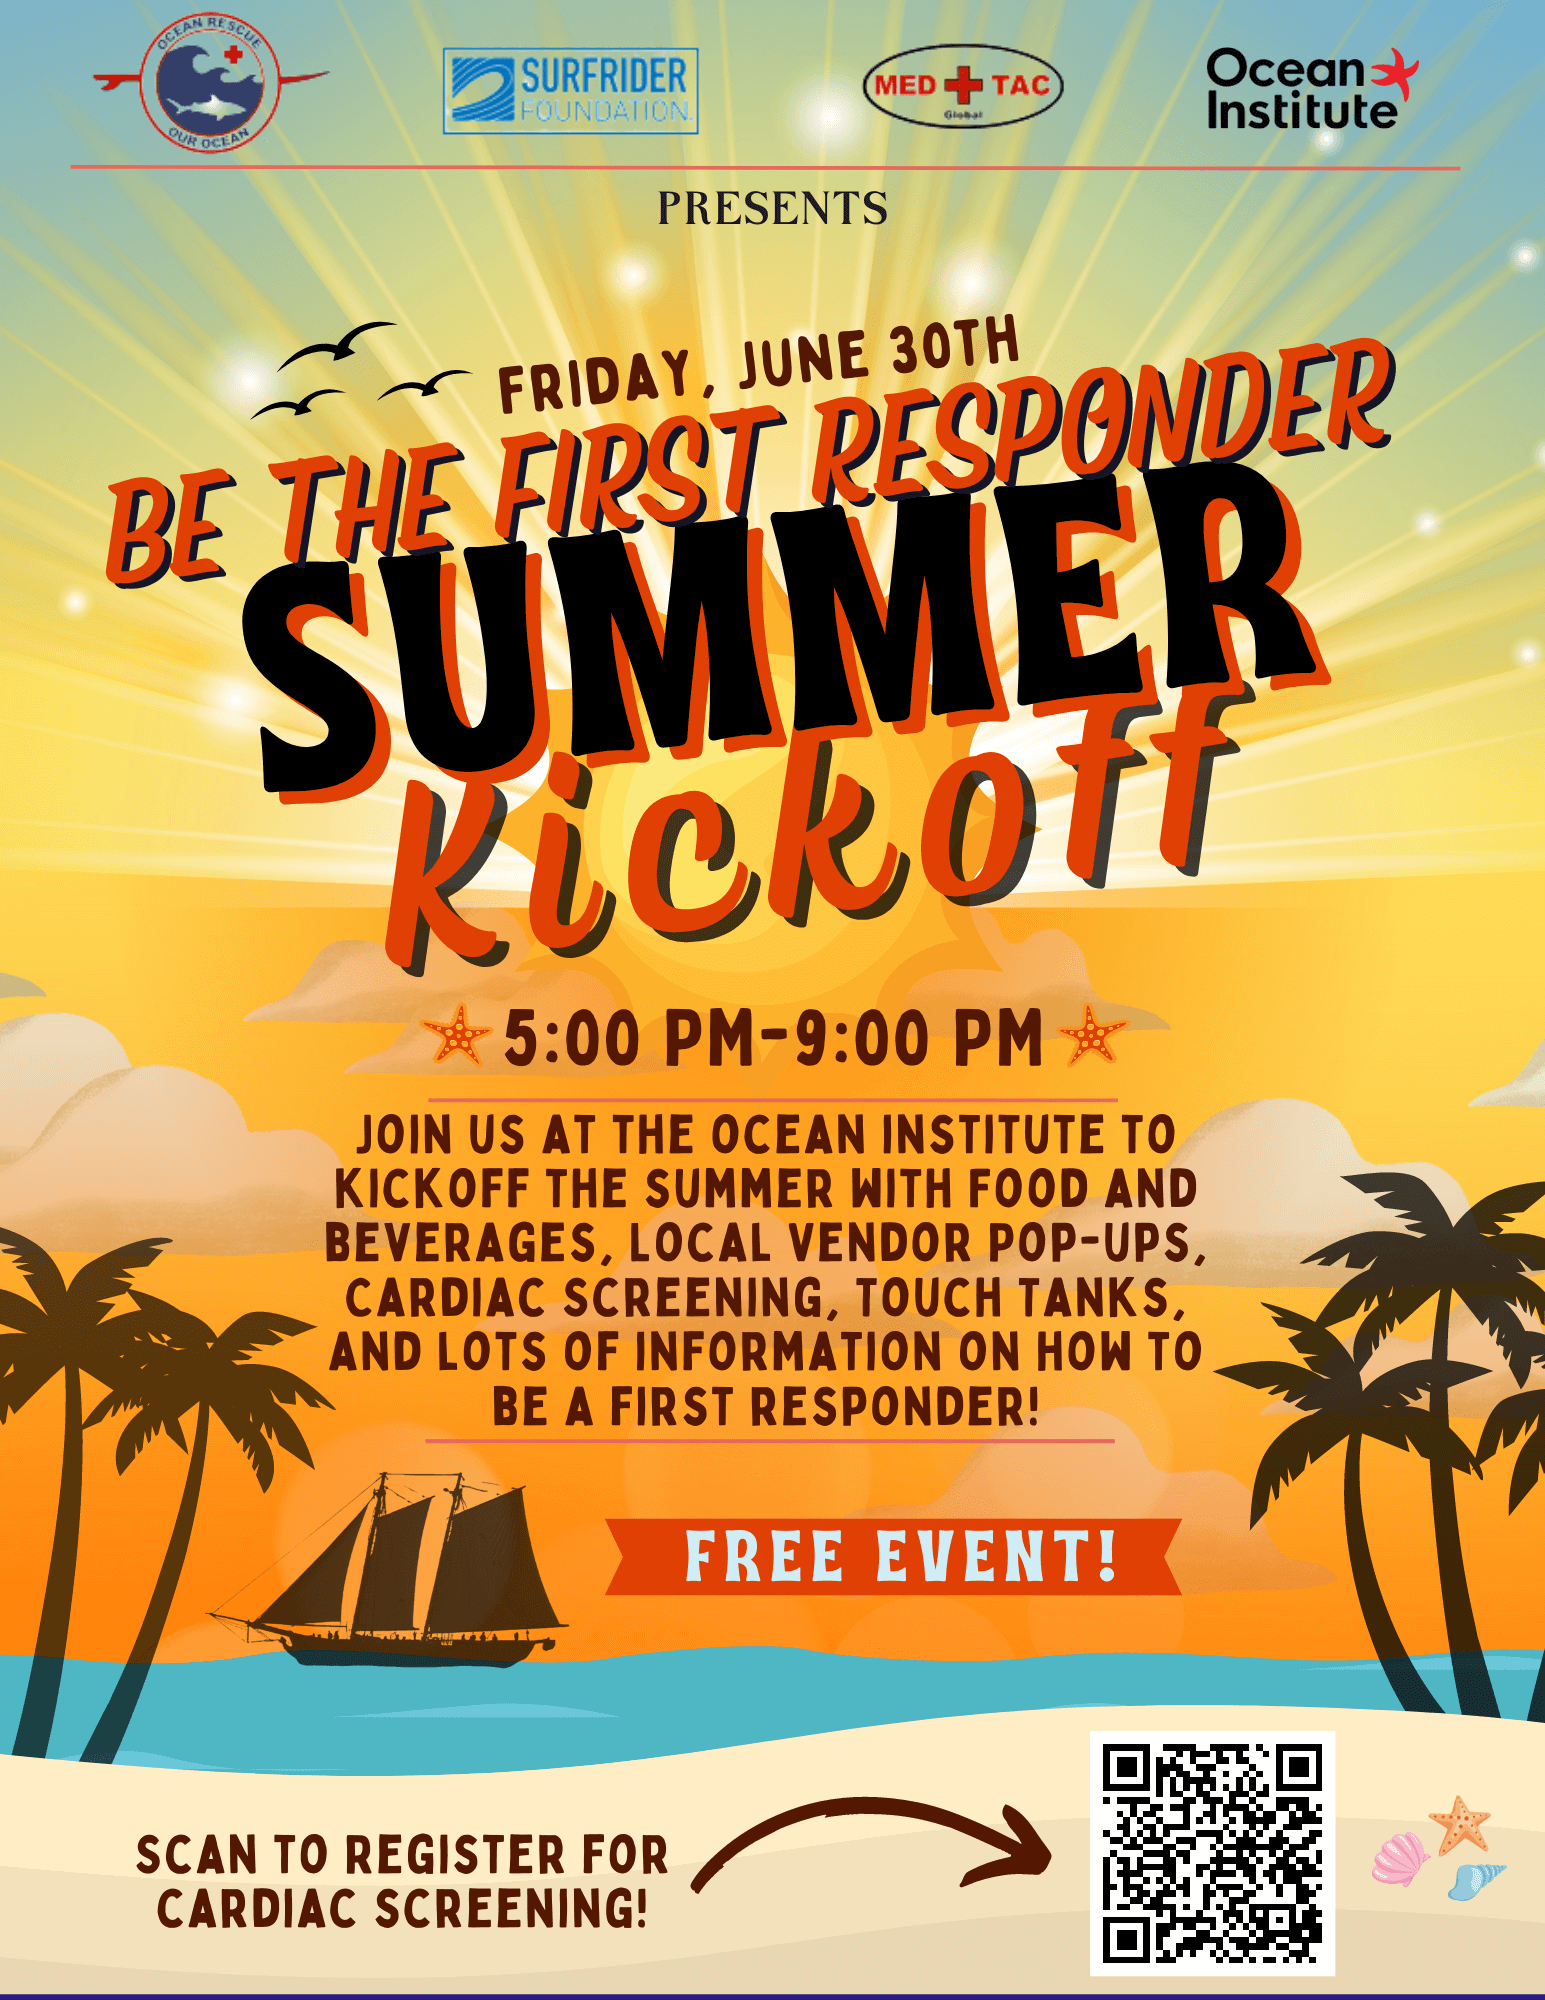 Be The First Responder Summer Kickoff